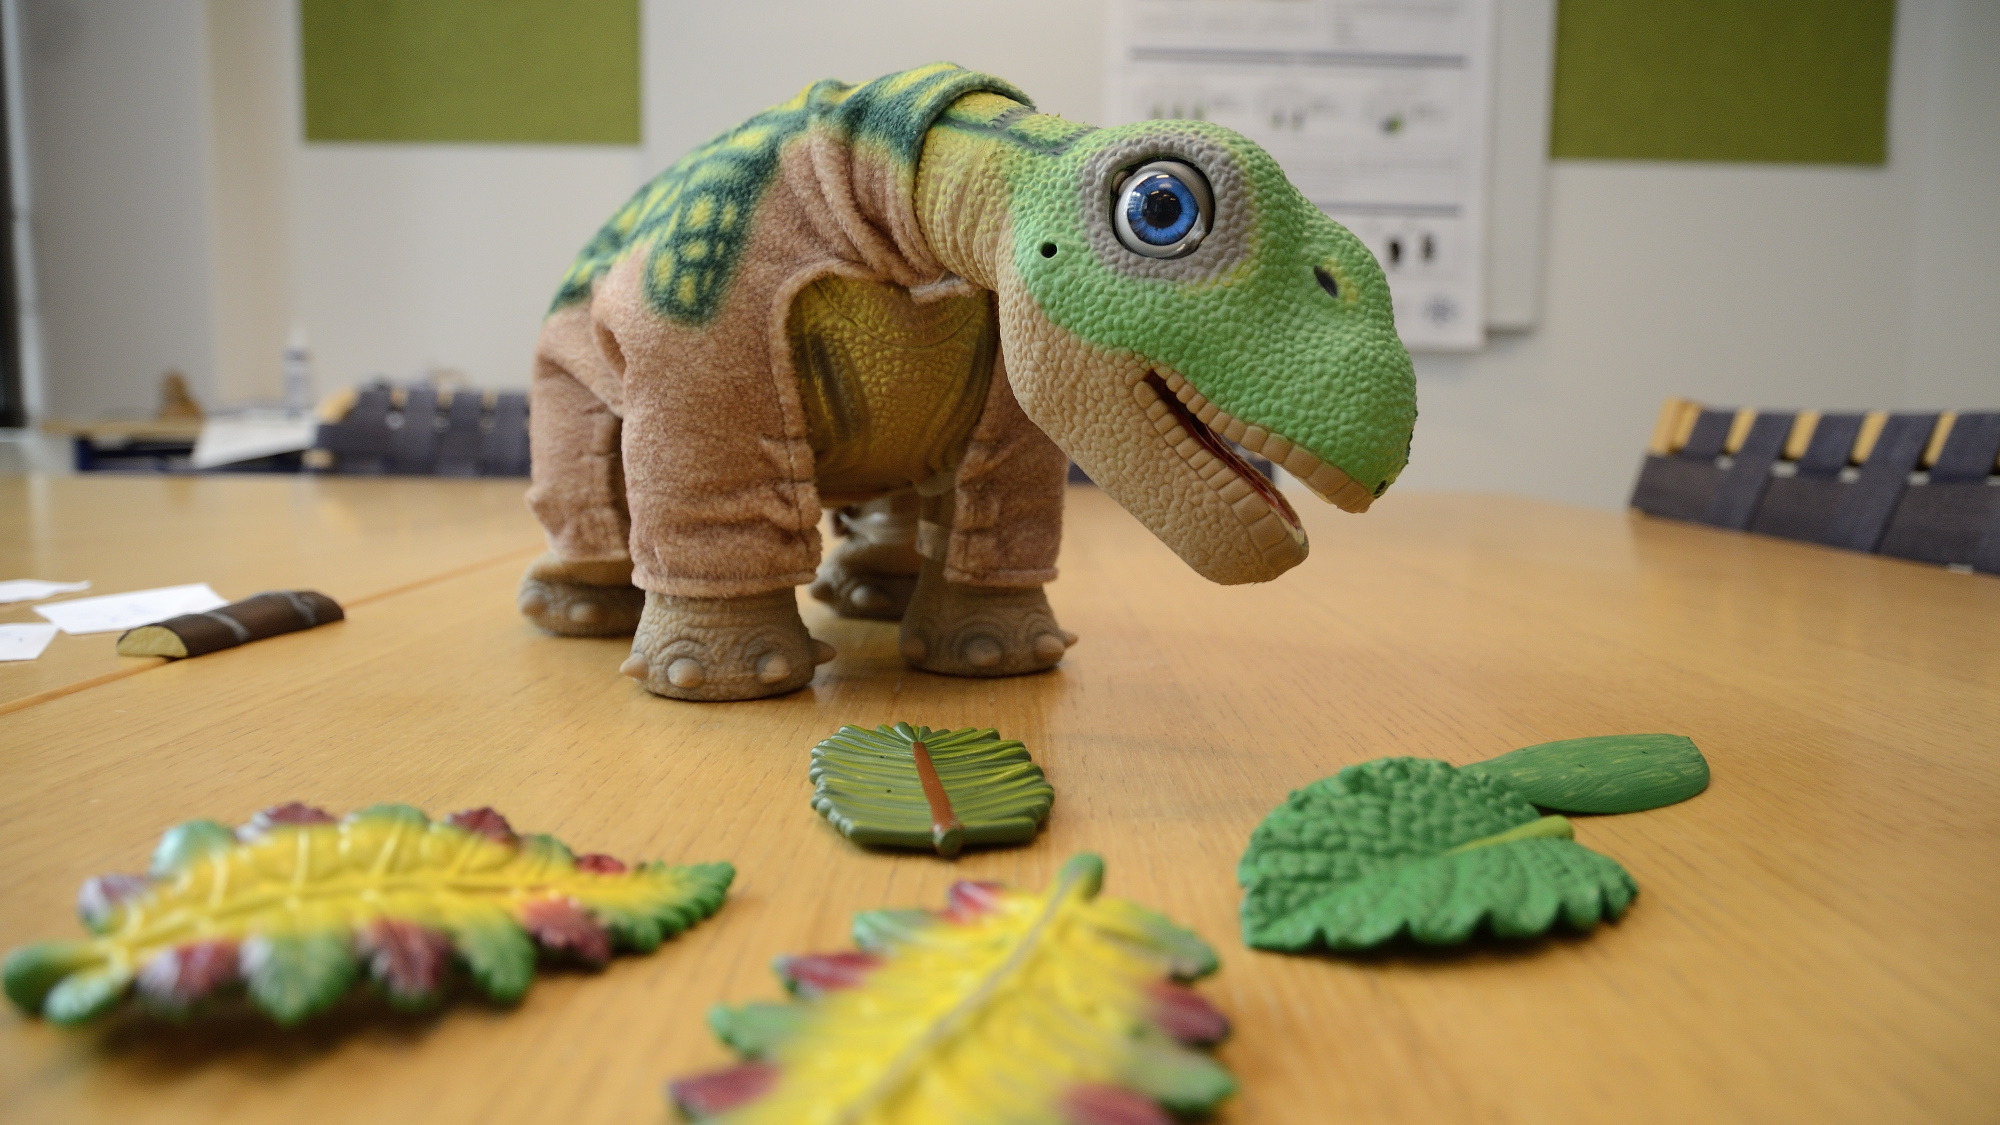 The Pleo rb is a versatile toy robot. It needs food and attention, like any real pet.